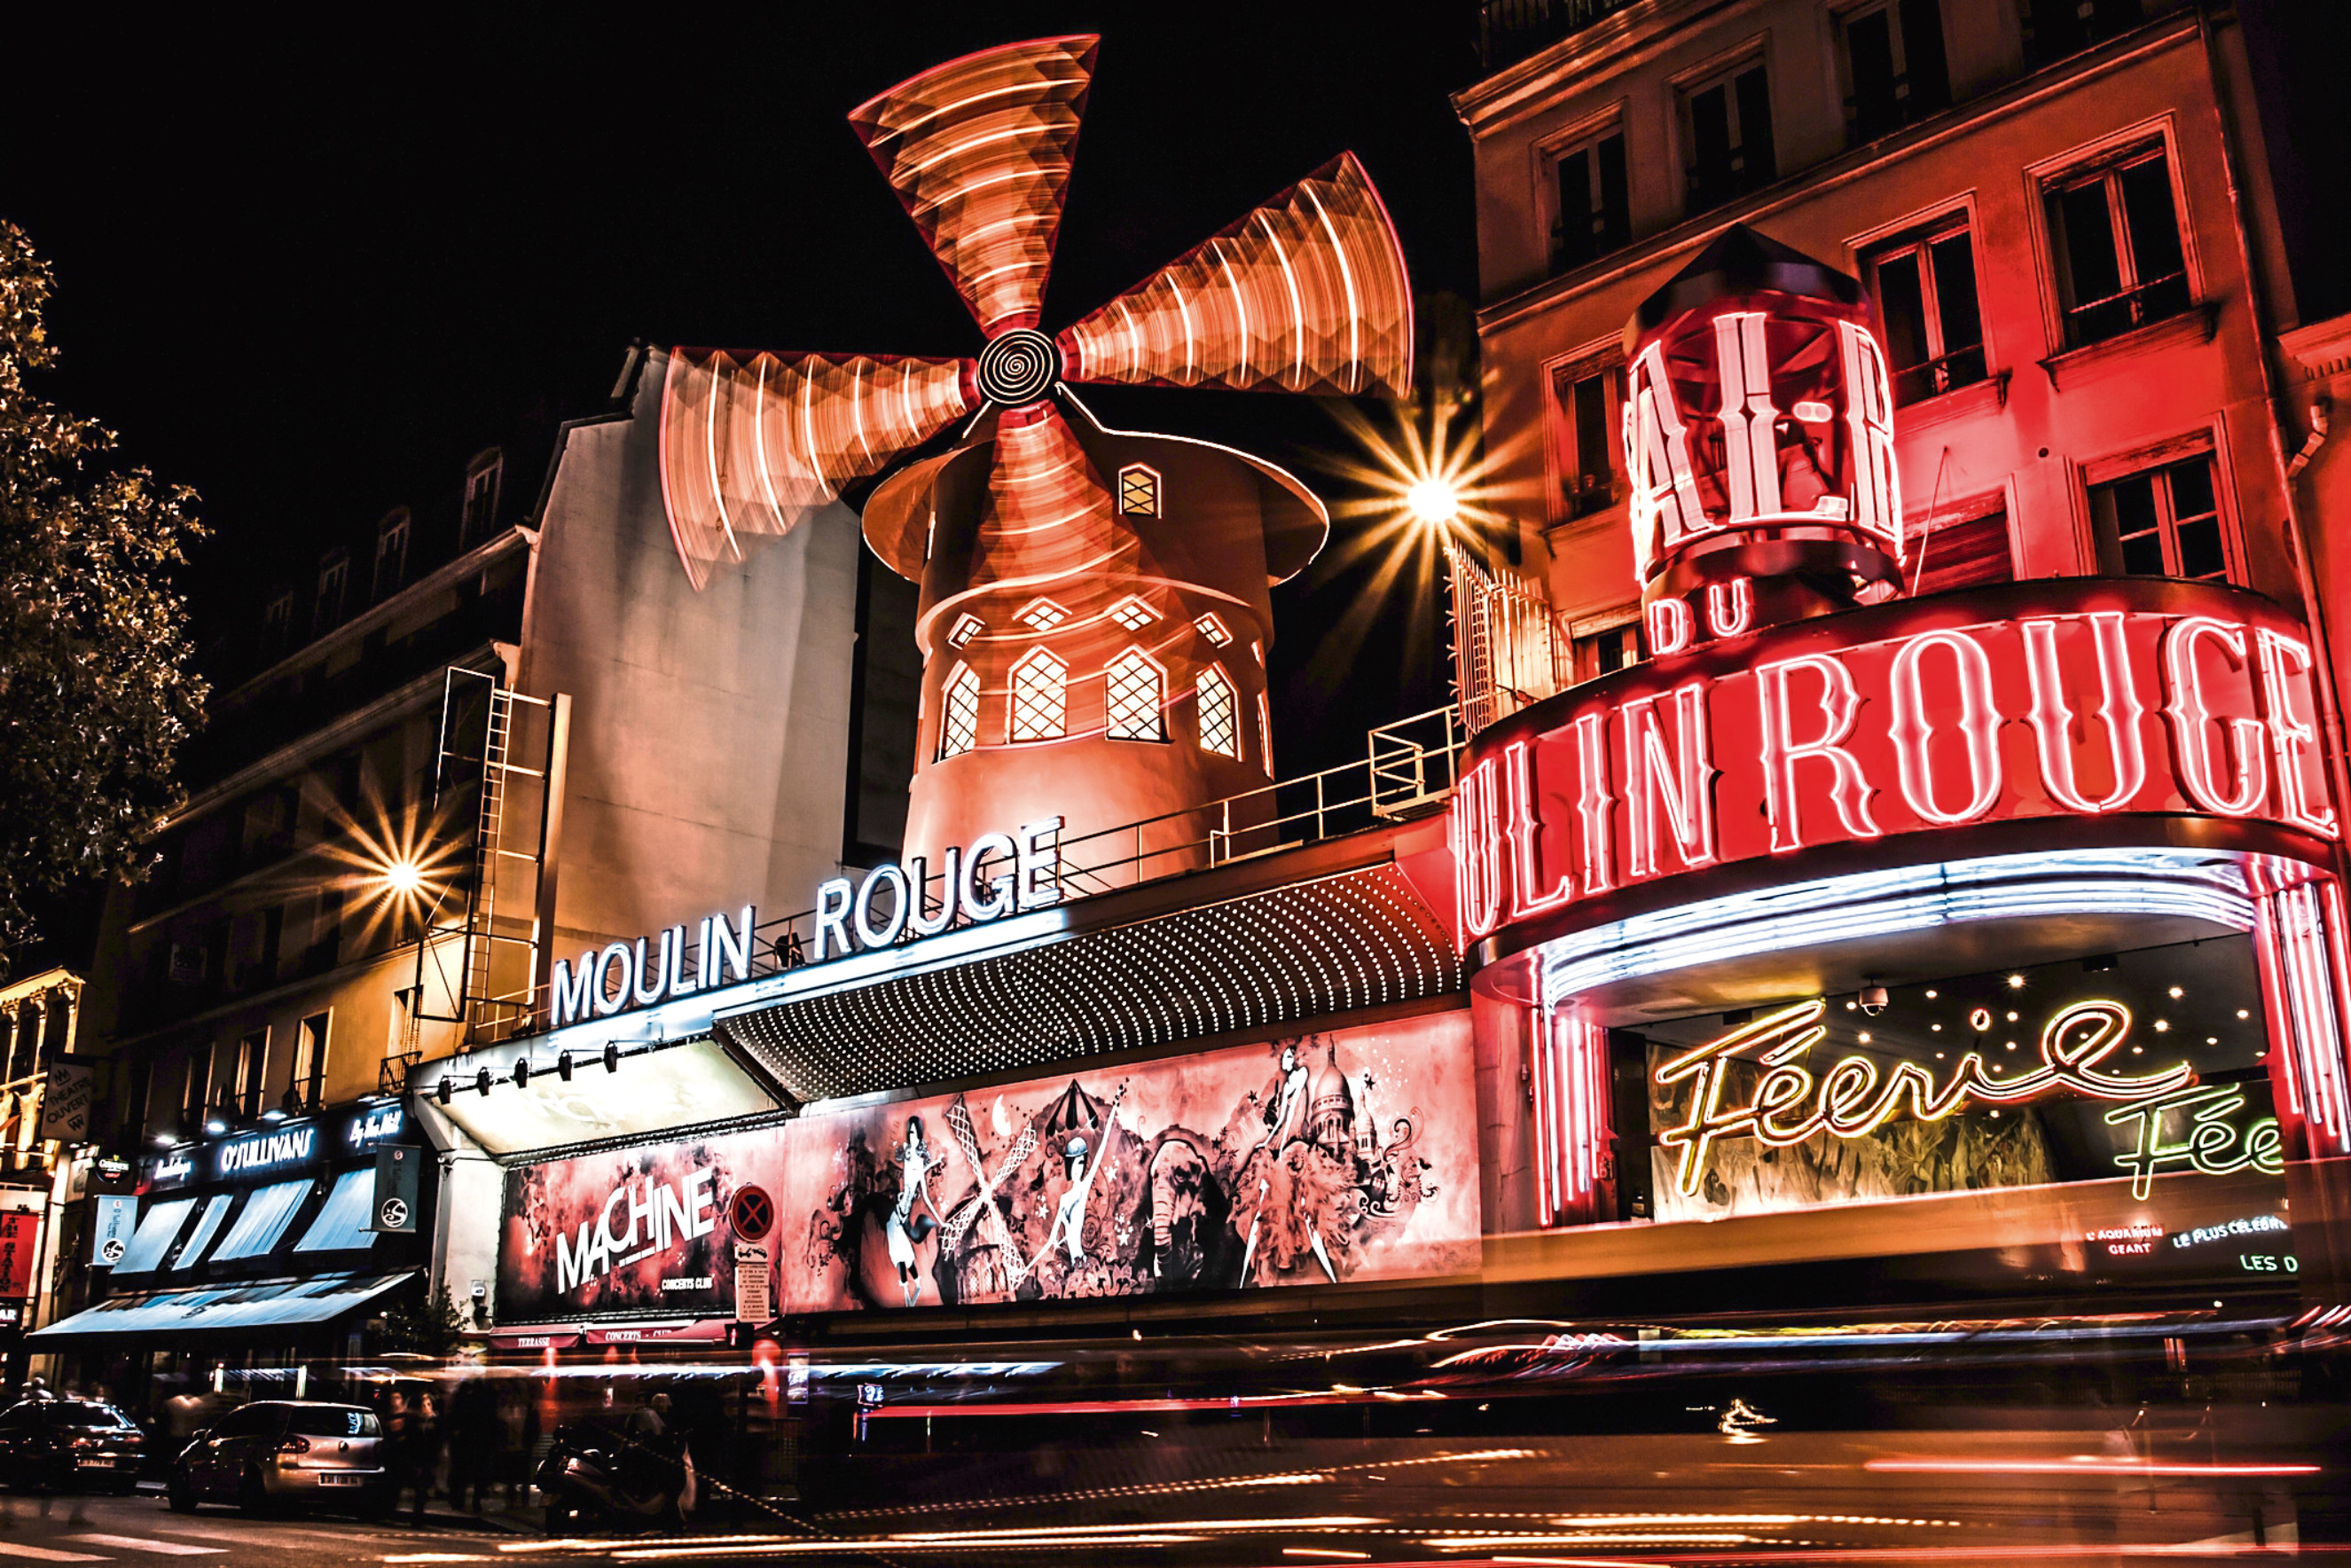 The Moulin Rouge by night, Paris